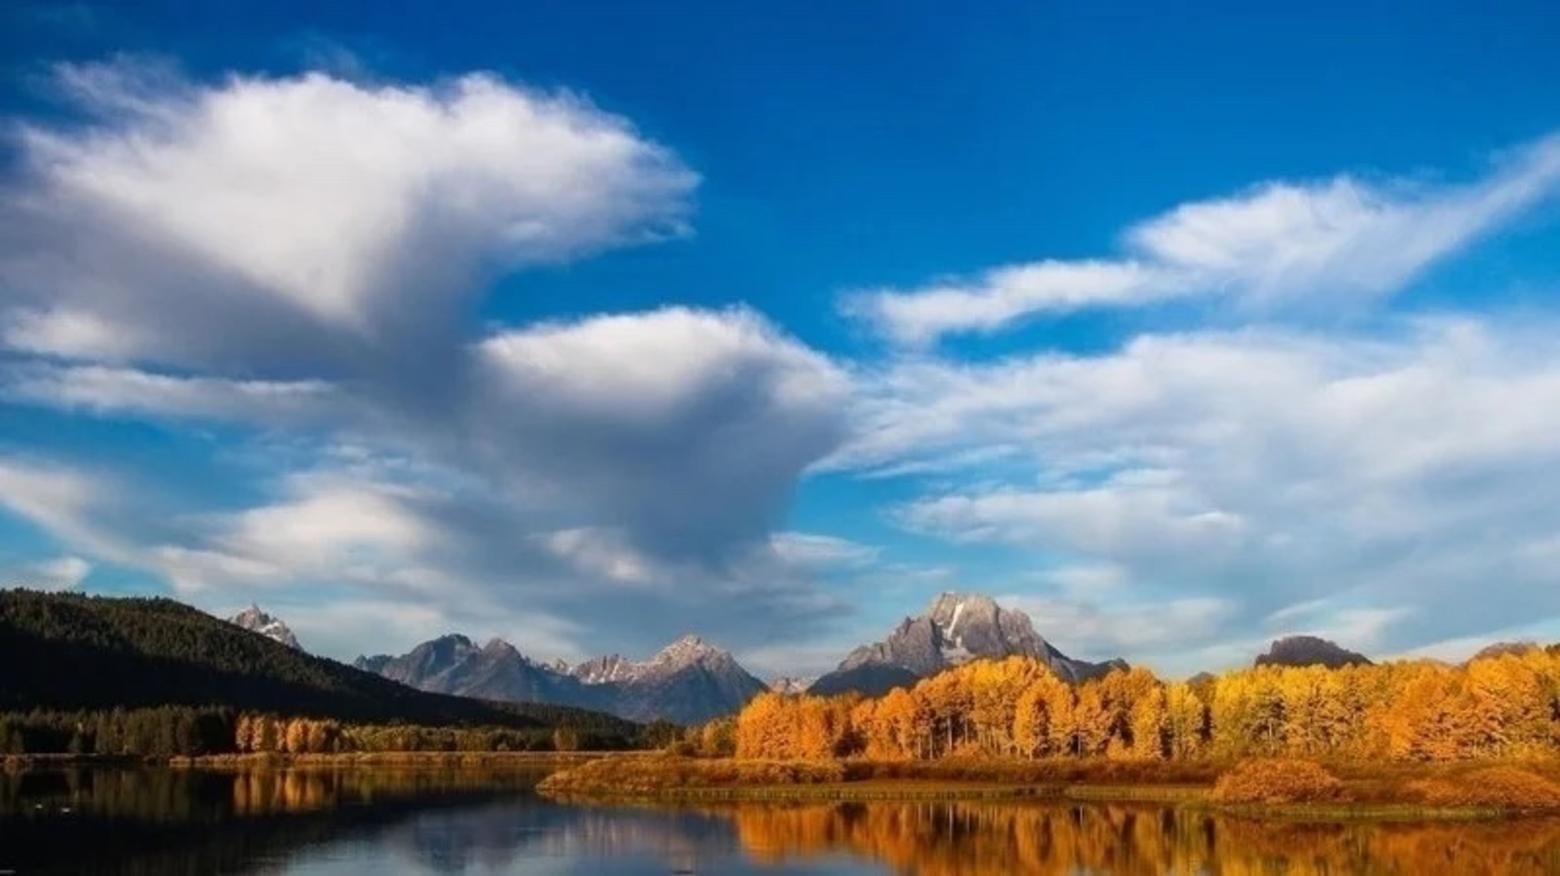 The Oxbow Bend of the Snake River in Grand Teton National Park, one of the premier wildlife-viewing locations in Greater Yellowstone. Photo courtesy Jackson Hole EcoTour Adventures  (jhecotouradventures.com)